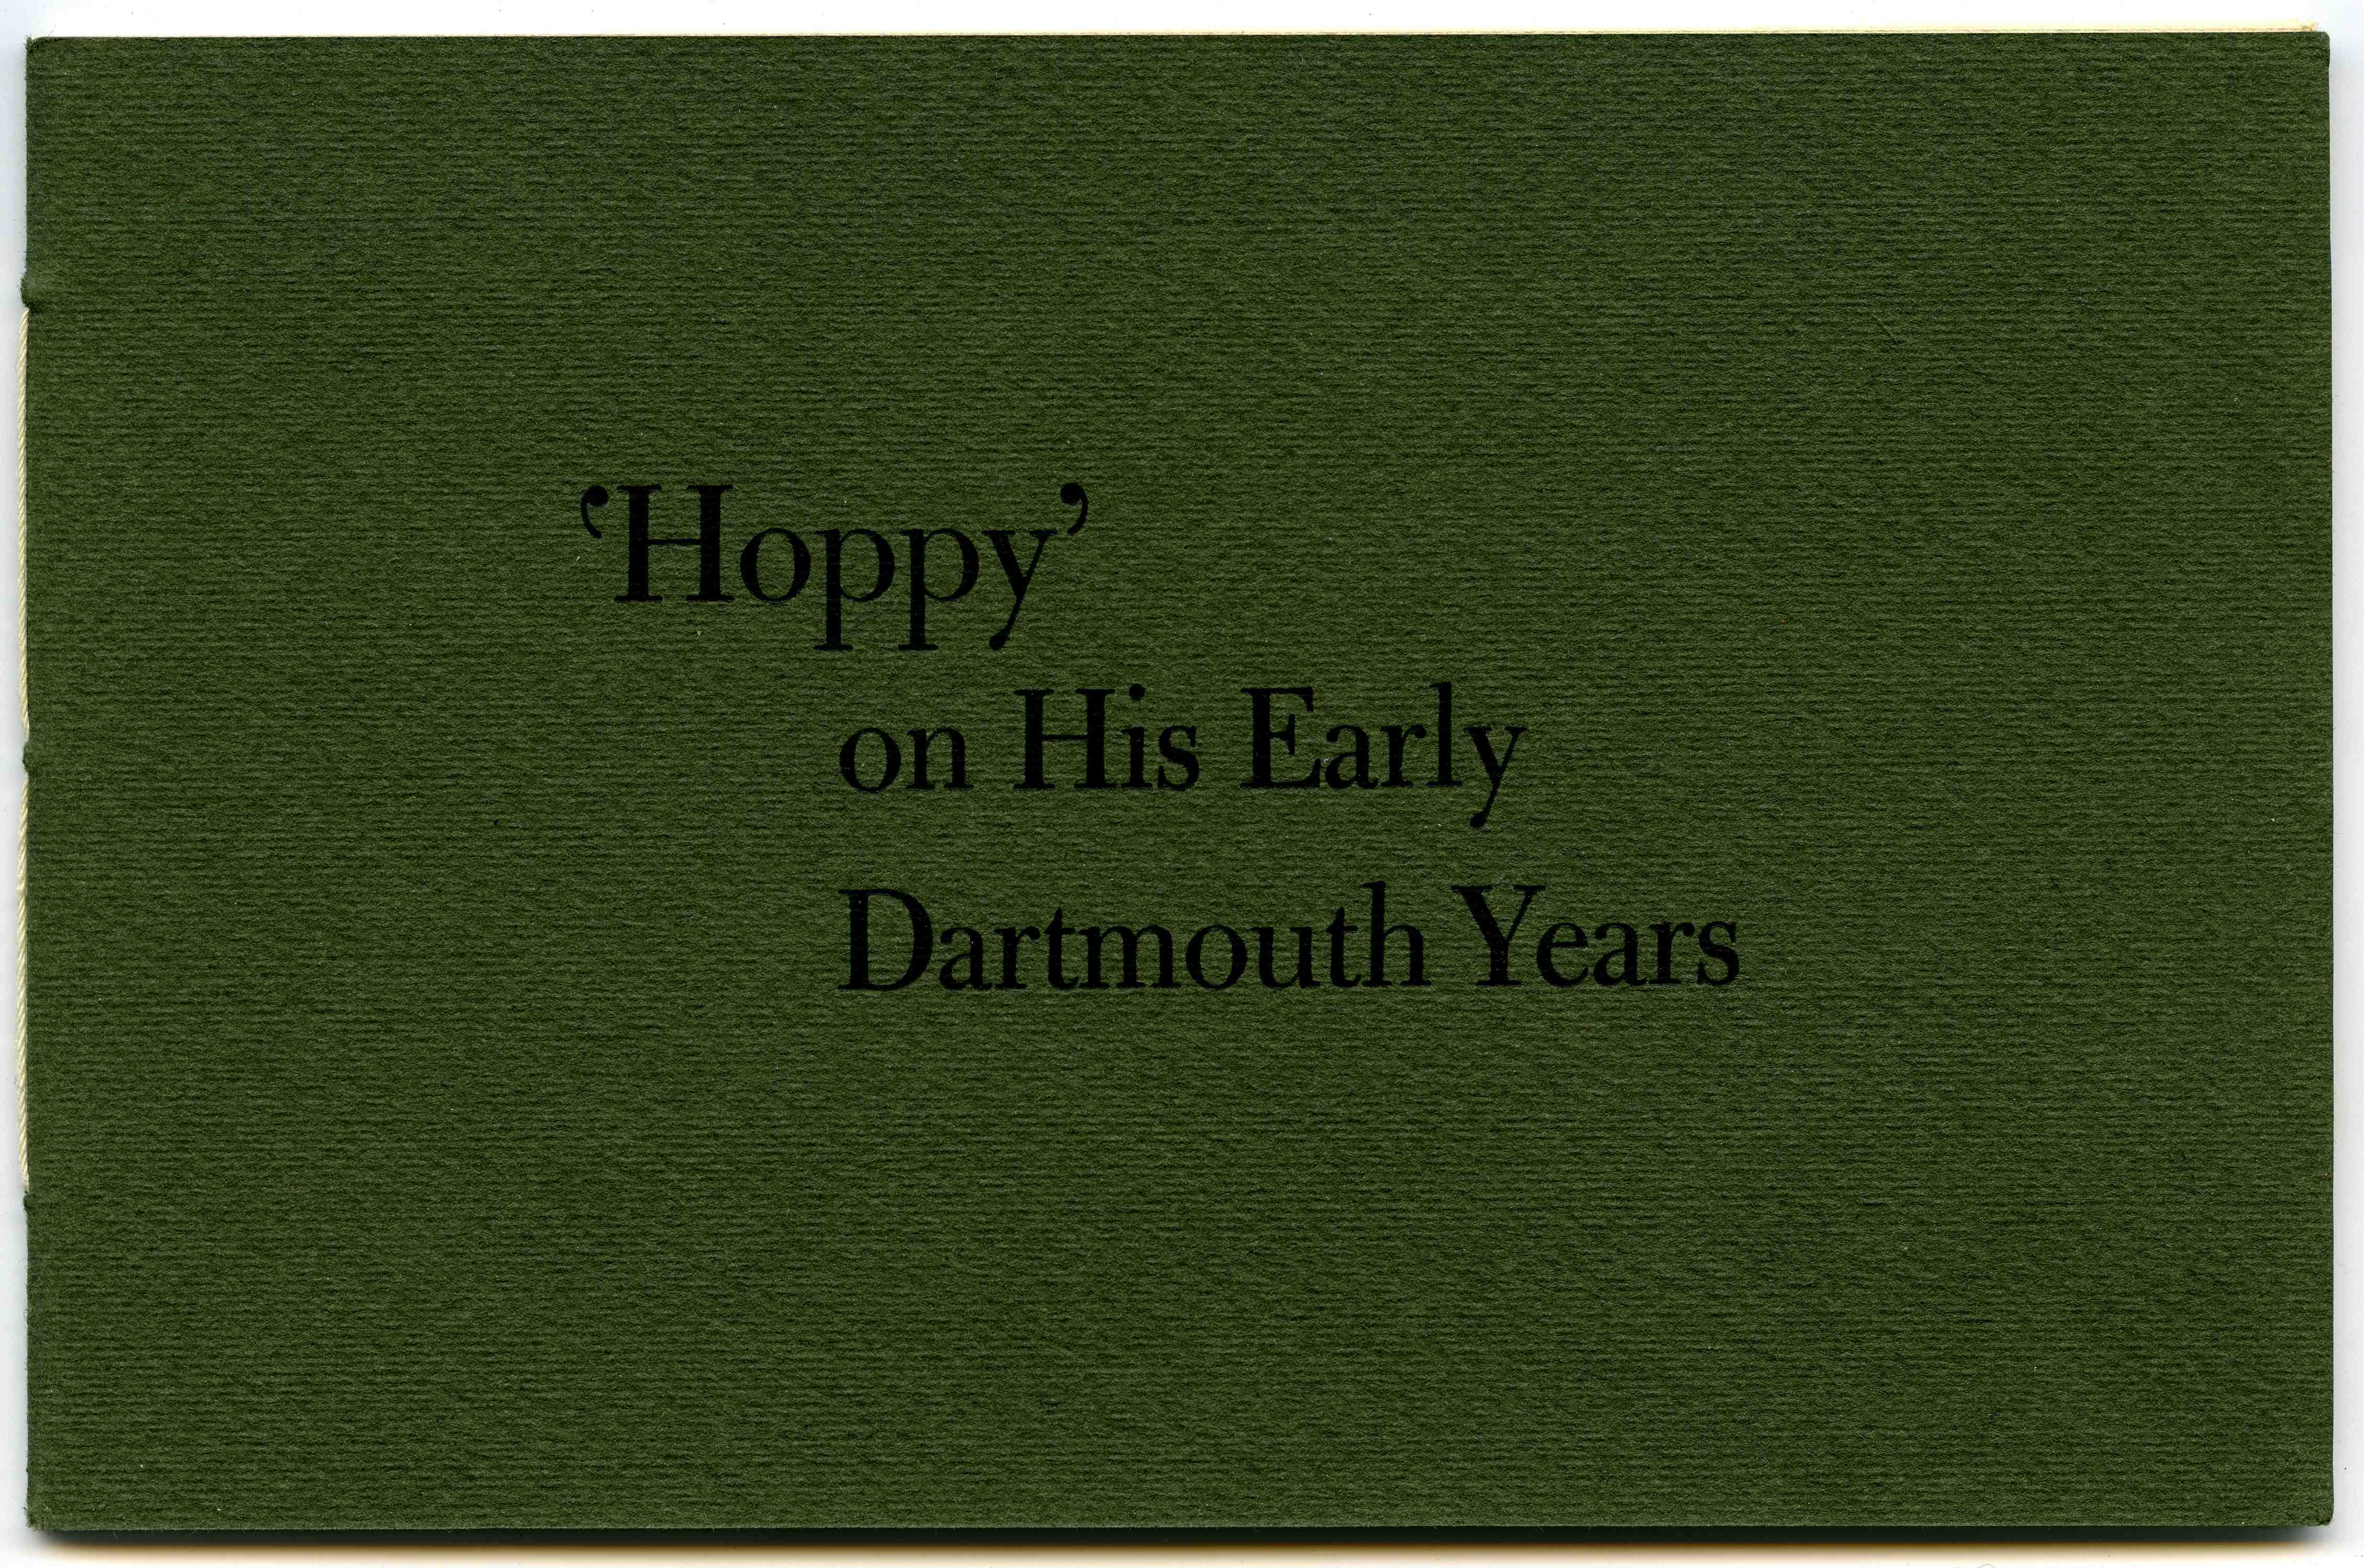 'Hoppy' on His Early Dartmouth Years cover